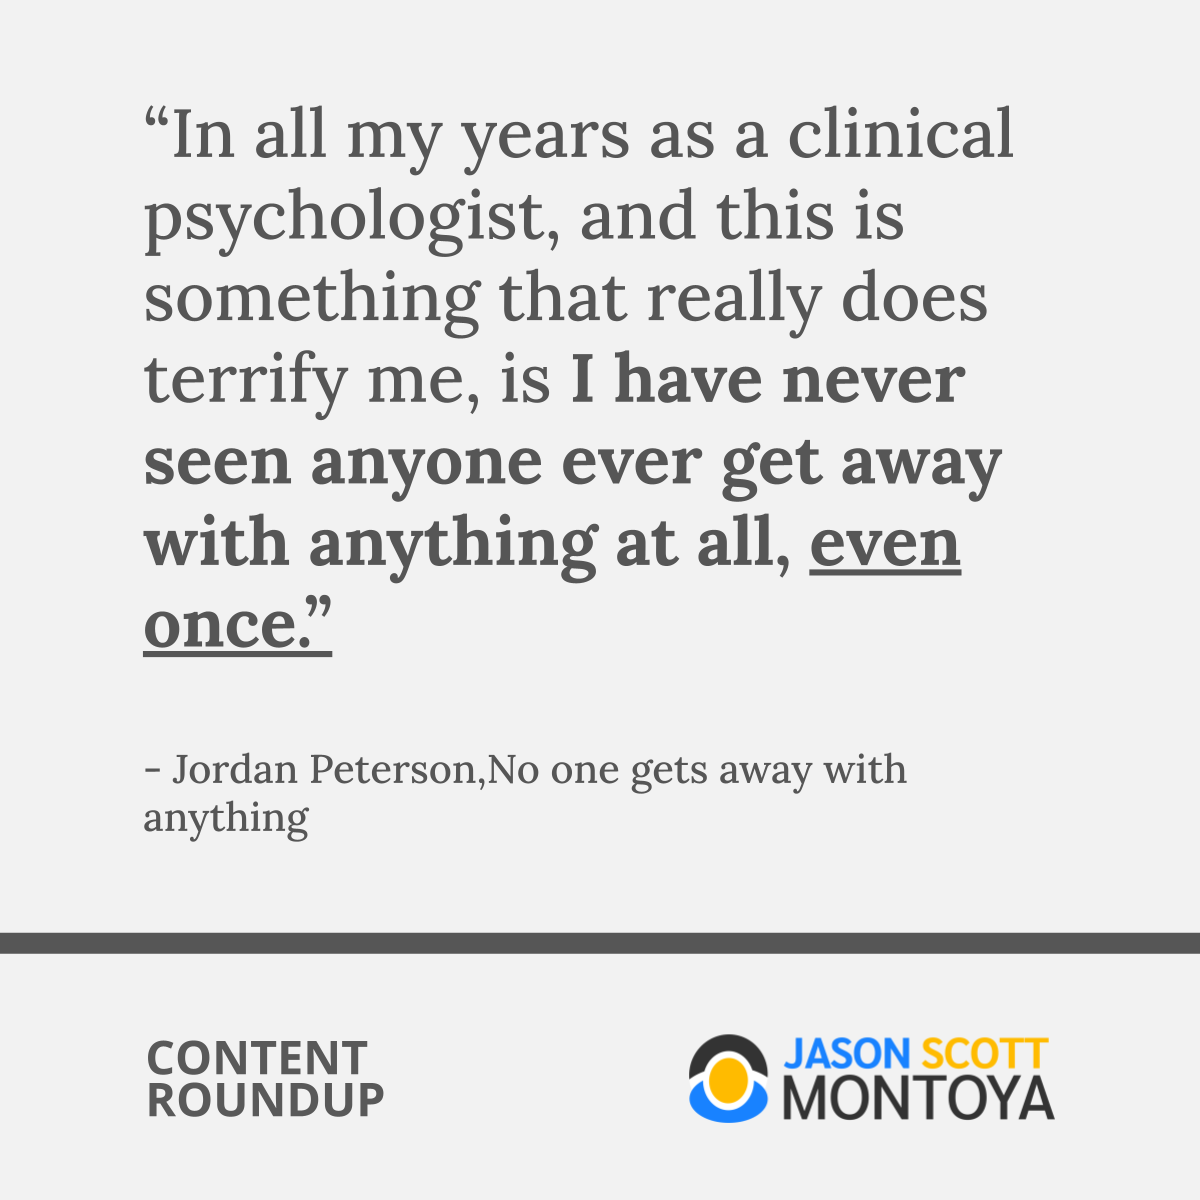 “In all my years as a clinical psychologist, and this is something that really does terrify me, is I have never seen anyone ever get away with anything at all, even once.”  - Jordan Peterson,No one gets away with anything